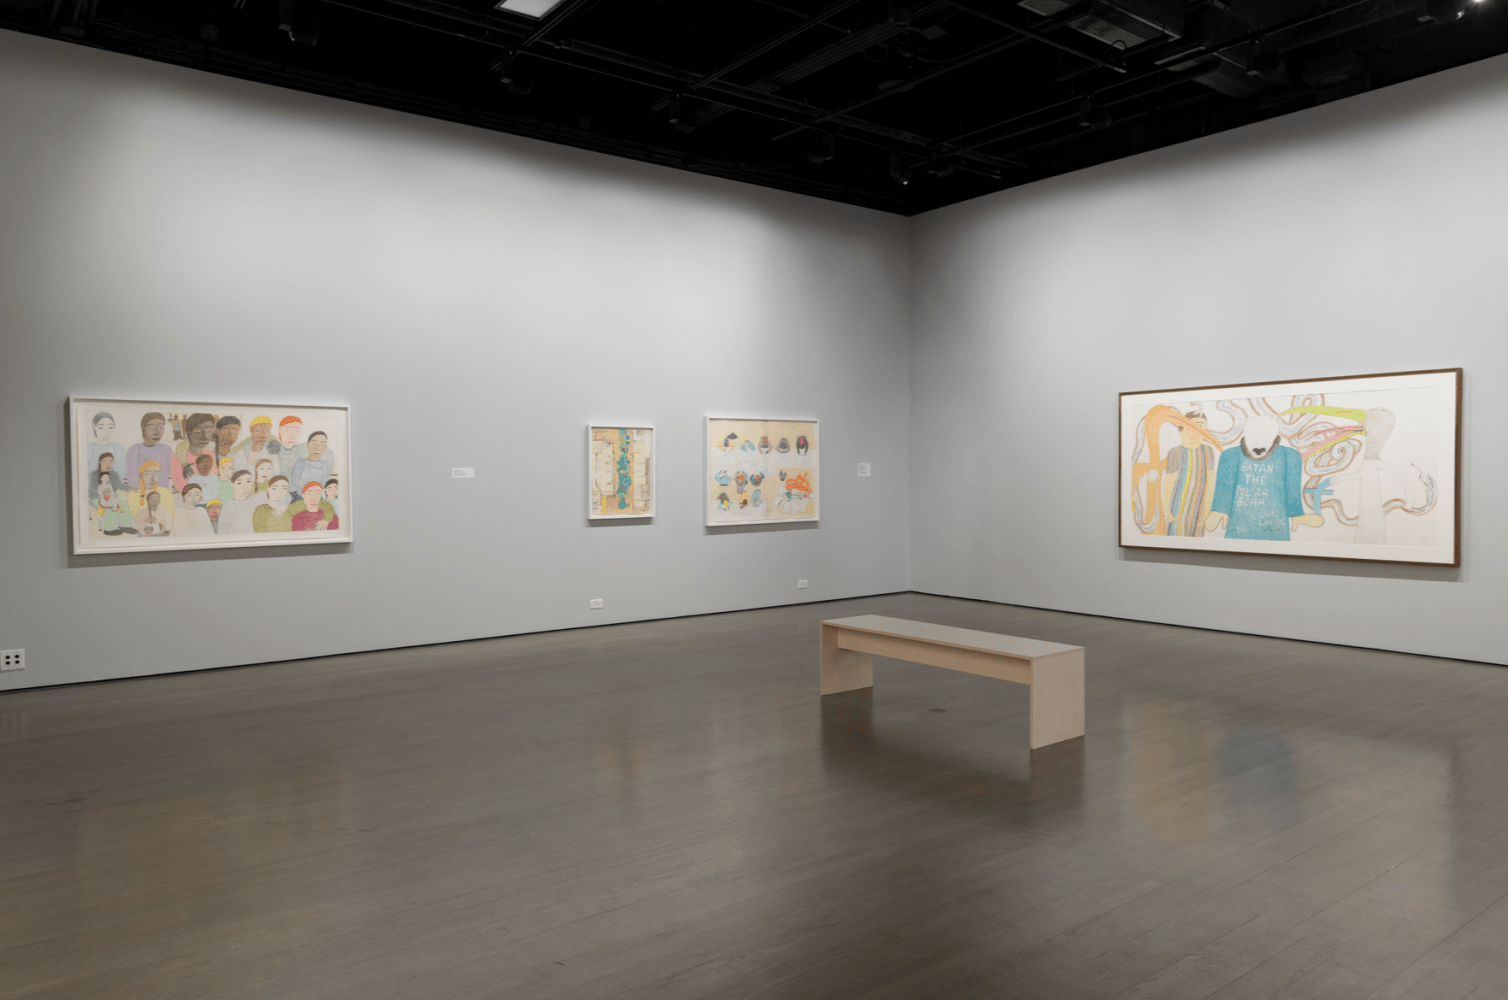 Installation view of Shuvinai Ashoona: Mapping Worlds at the Leonard &amp;amp; Bina Ellen Art Gallery, Concordia University, Montreal, 2019. Exhibition organized and circulated by The Power Plant Contemporary Art Gallery, Toronto. Courtesy of the Leonard &amp;amp; Bina Ellen Art Gallery. Photo: Paul Litherland.